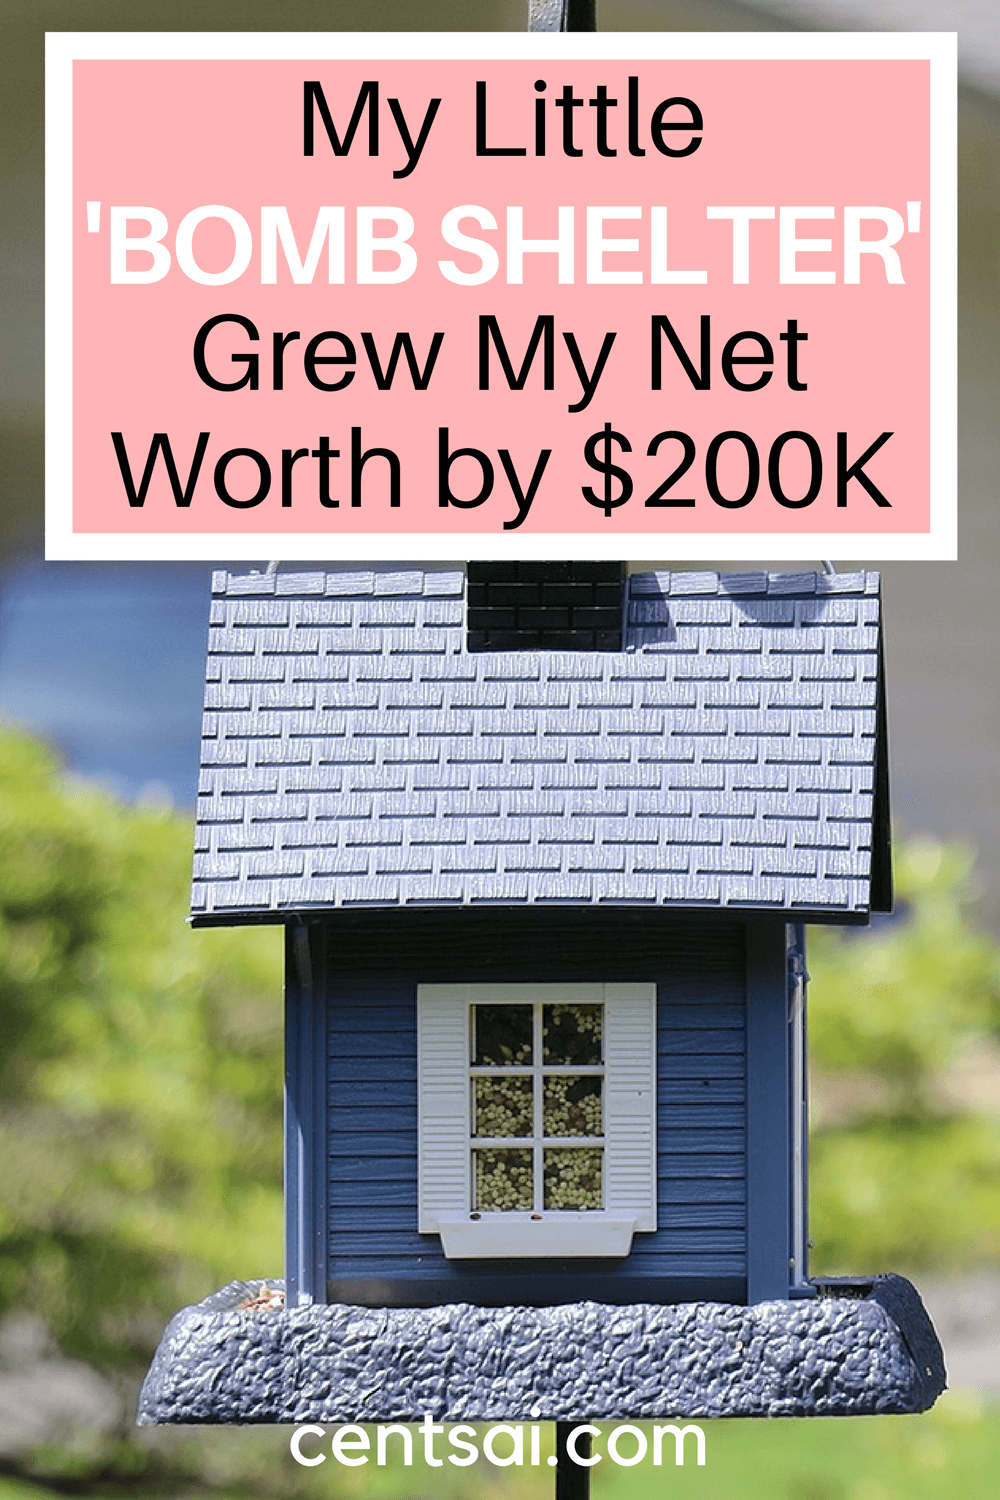 My Little ‘Bomb Shelter’ Grew My Net Worth by $200K. Finding reasonably priced real estate whose value is bound to appreciate in the long run can do wonders for your net worth.